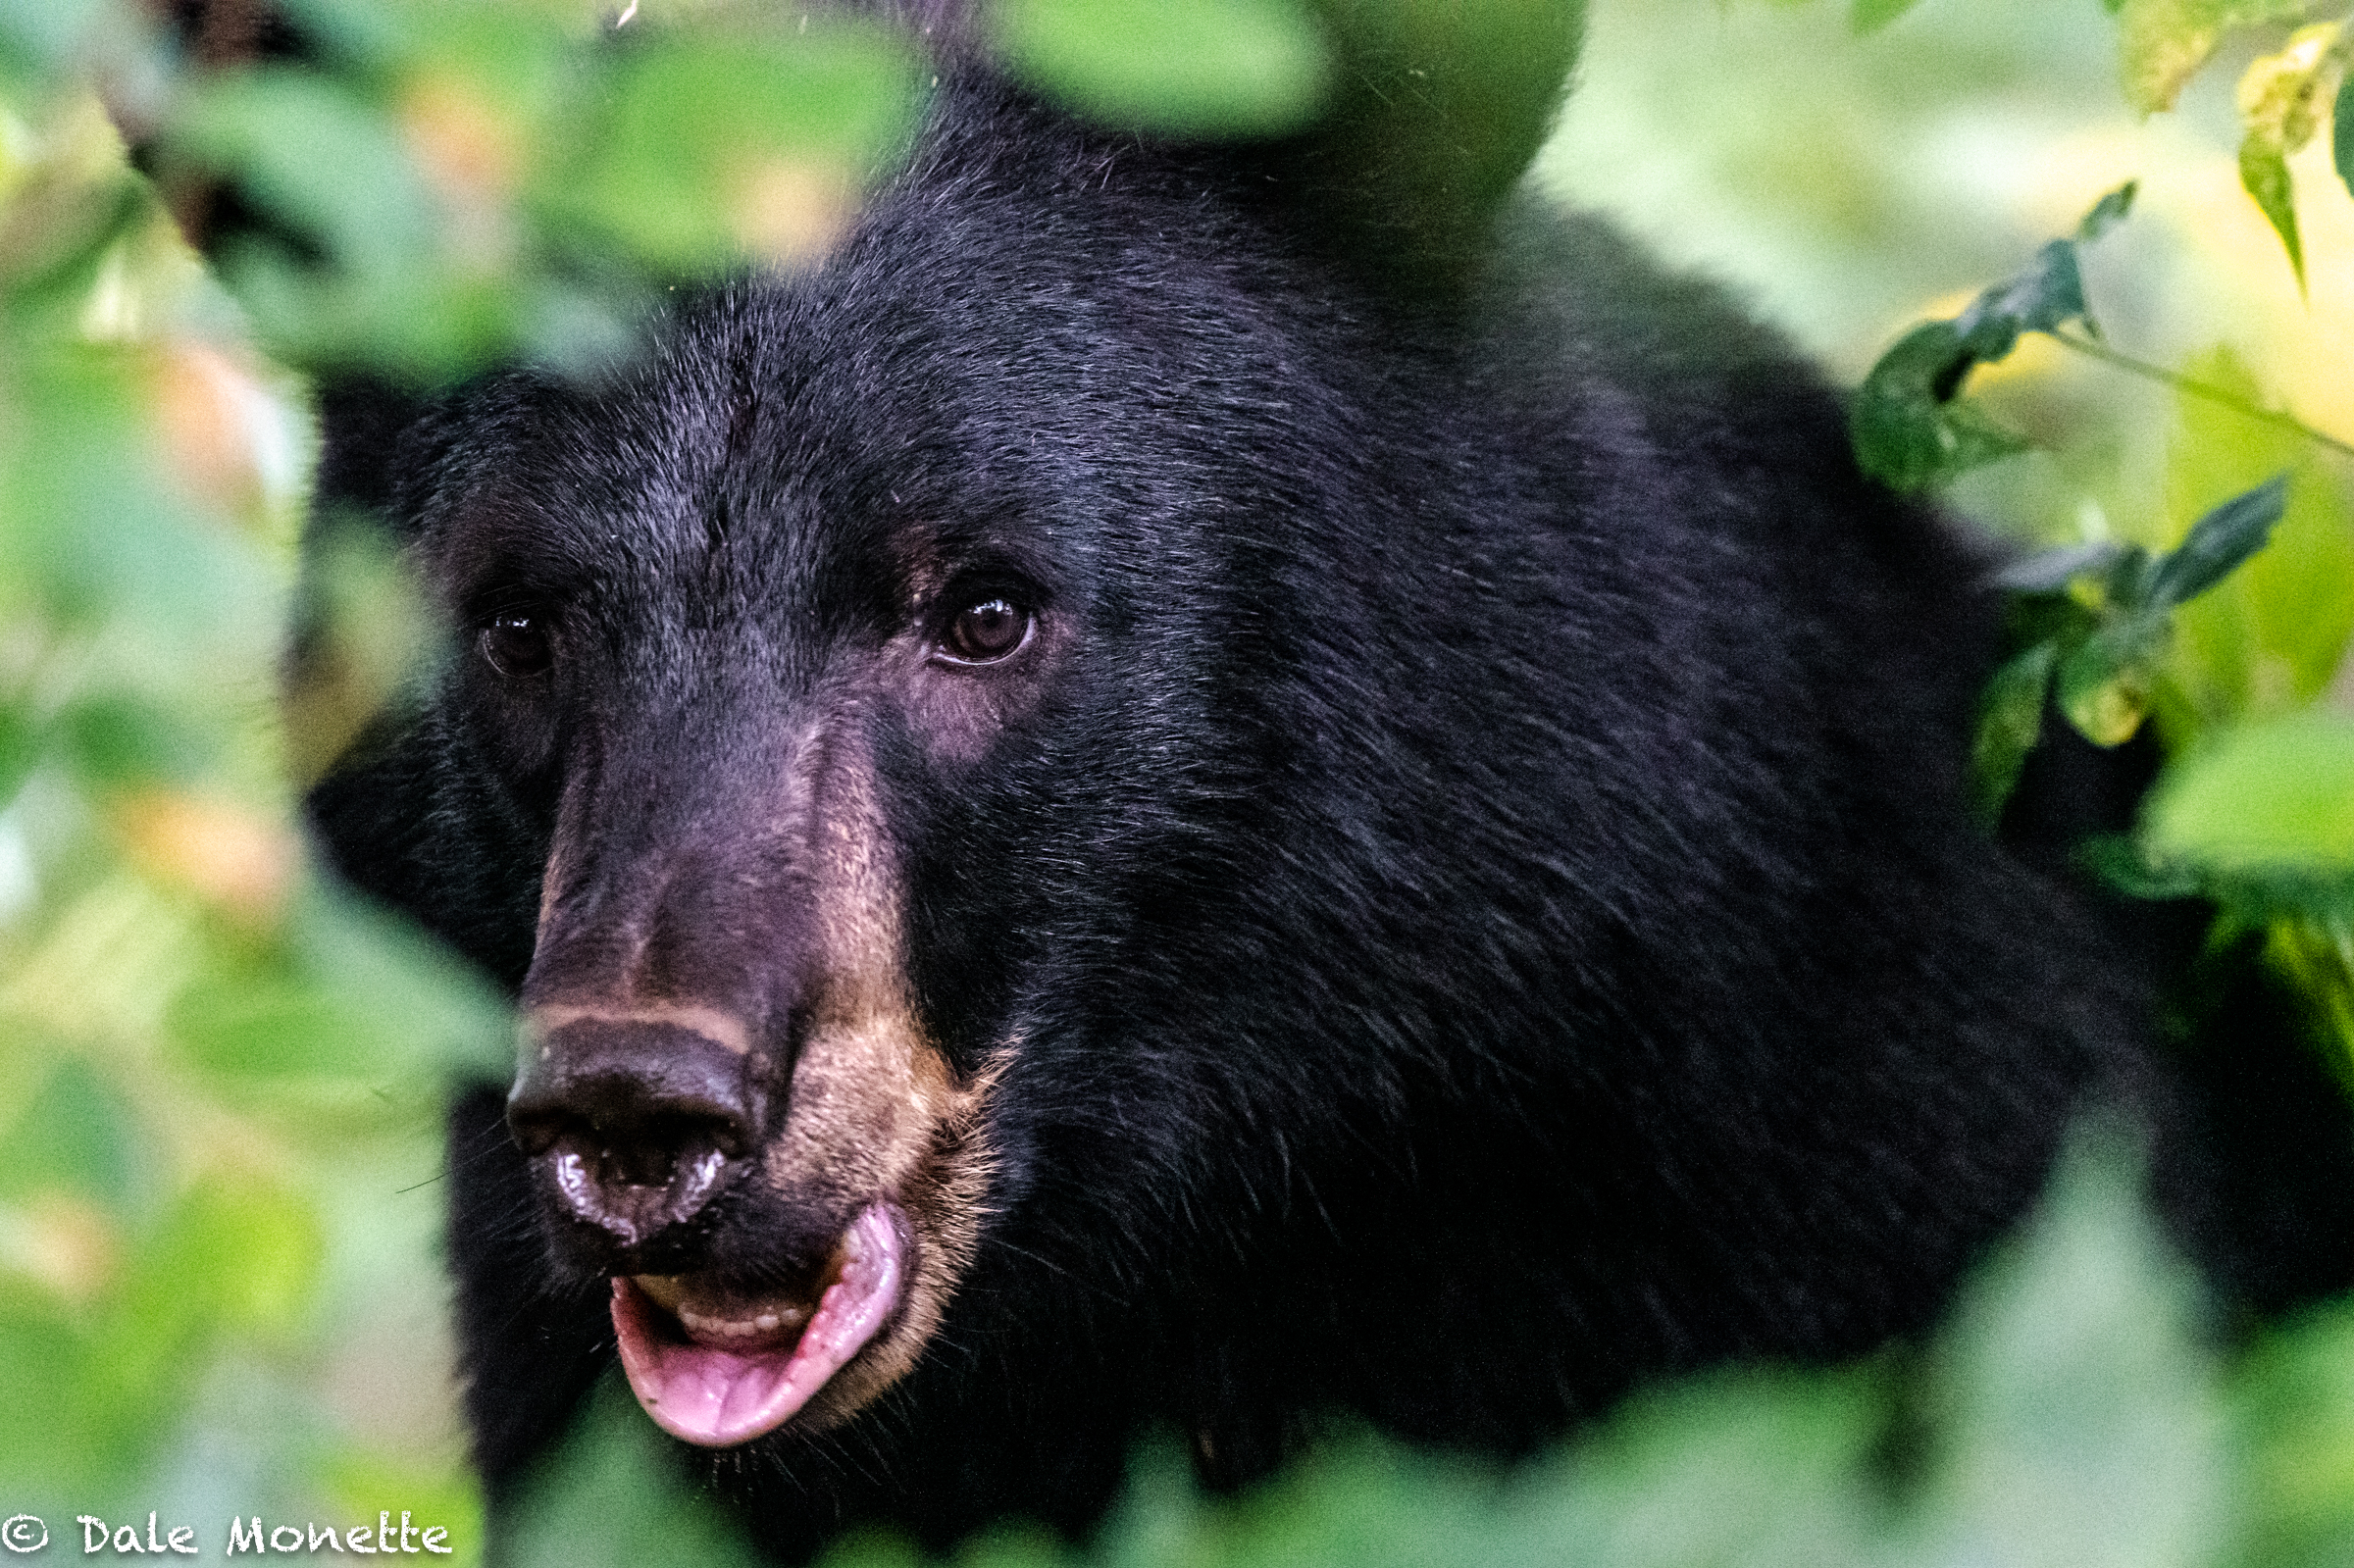   I was paid a visit by a black bear that came bumbling out of a thicket 40 feet from me standing along a beaver pond. He looked and me, I looked at him, I took 2 photos and off he sauntered, none the worse for wear ! We locked eyes and he didn’t see